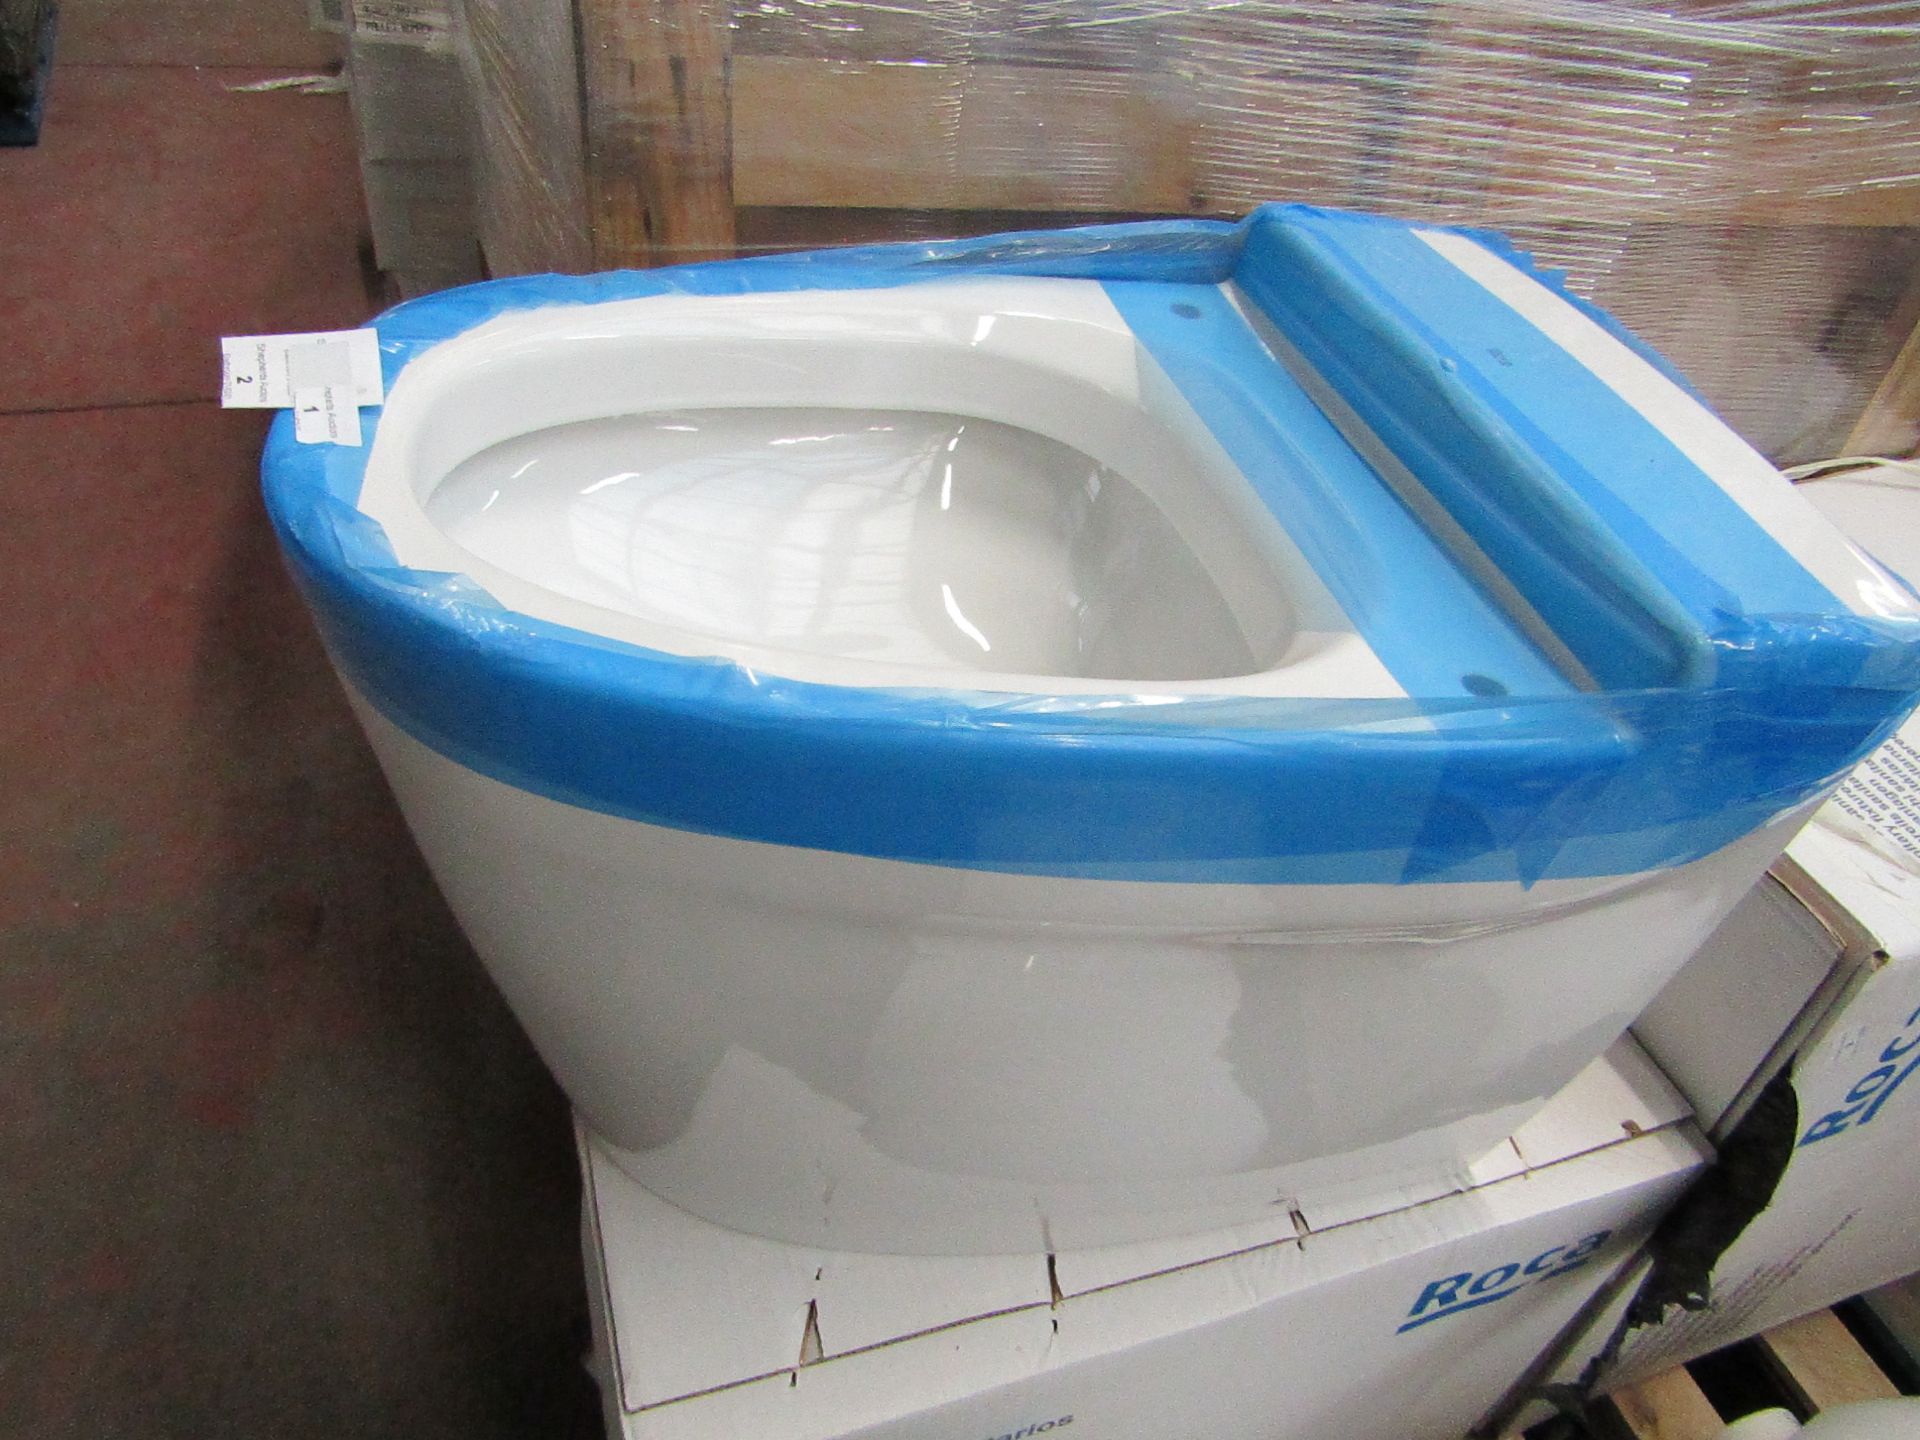 Roca Khroma toilet pan (no seat), new and boxed. RRP with seat £456.99